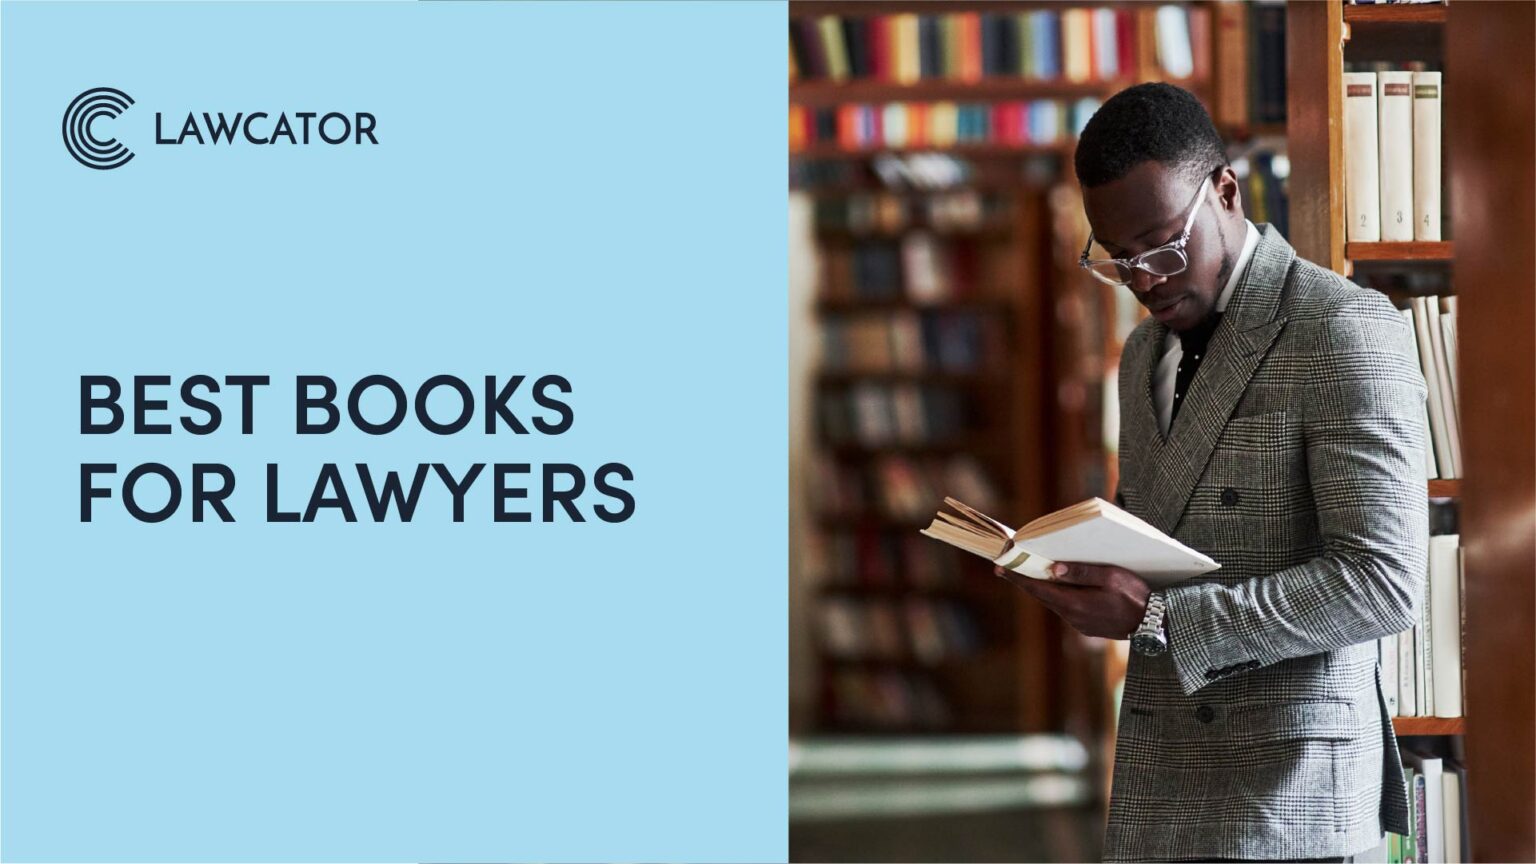 Best Books for Lawyers Lawcator Blog